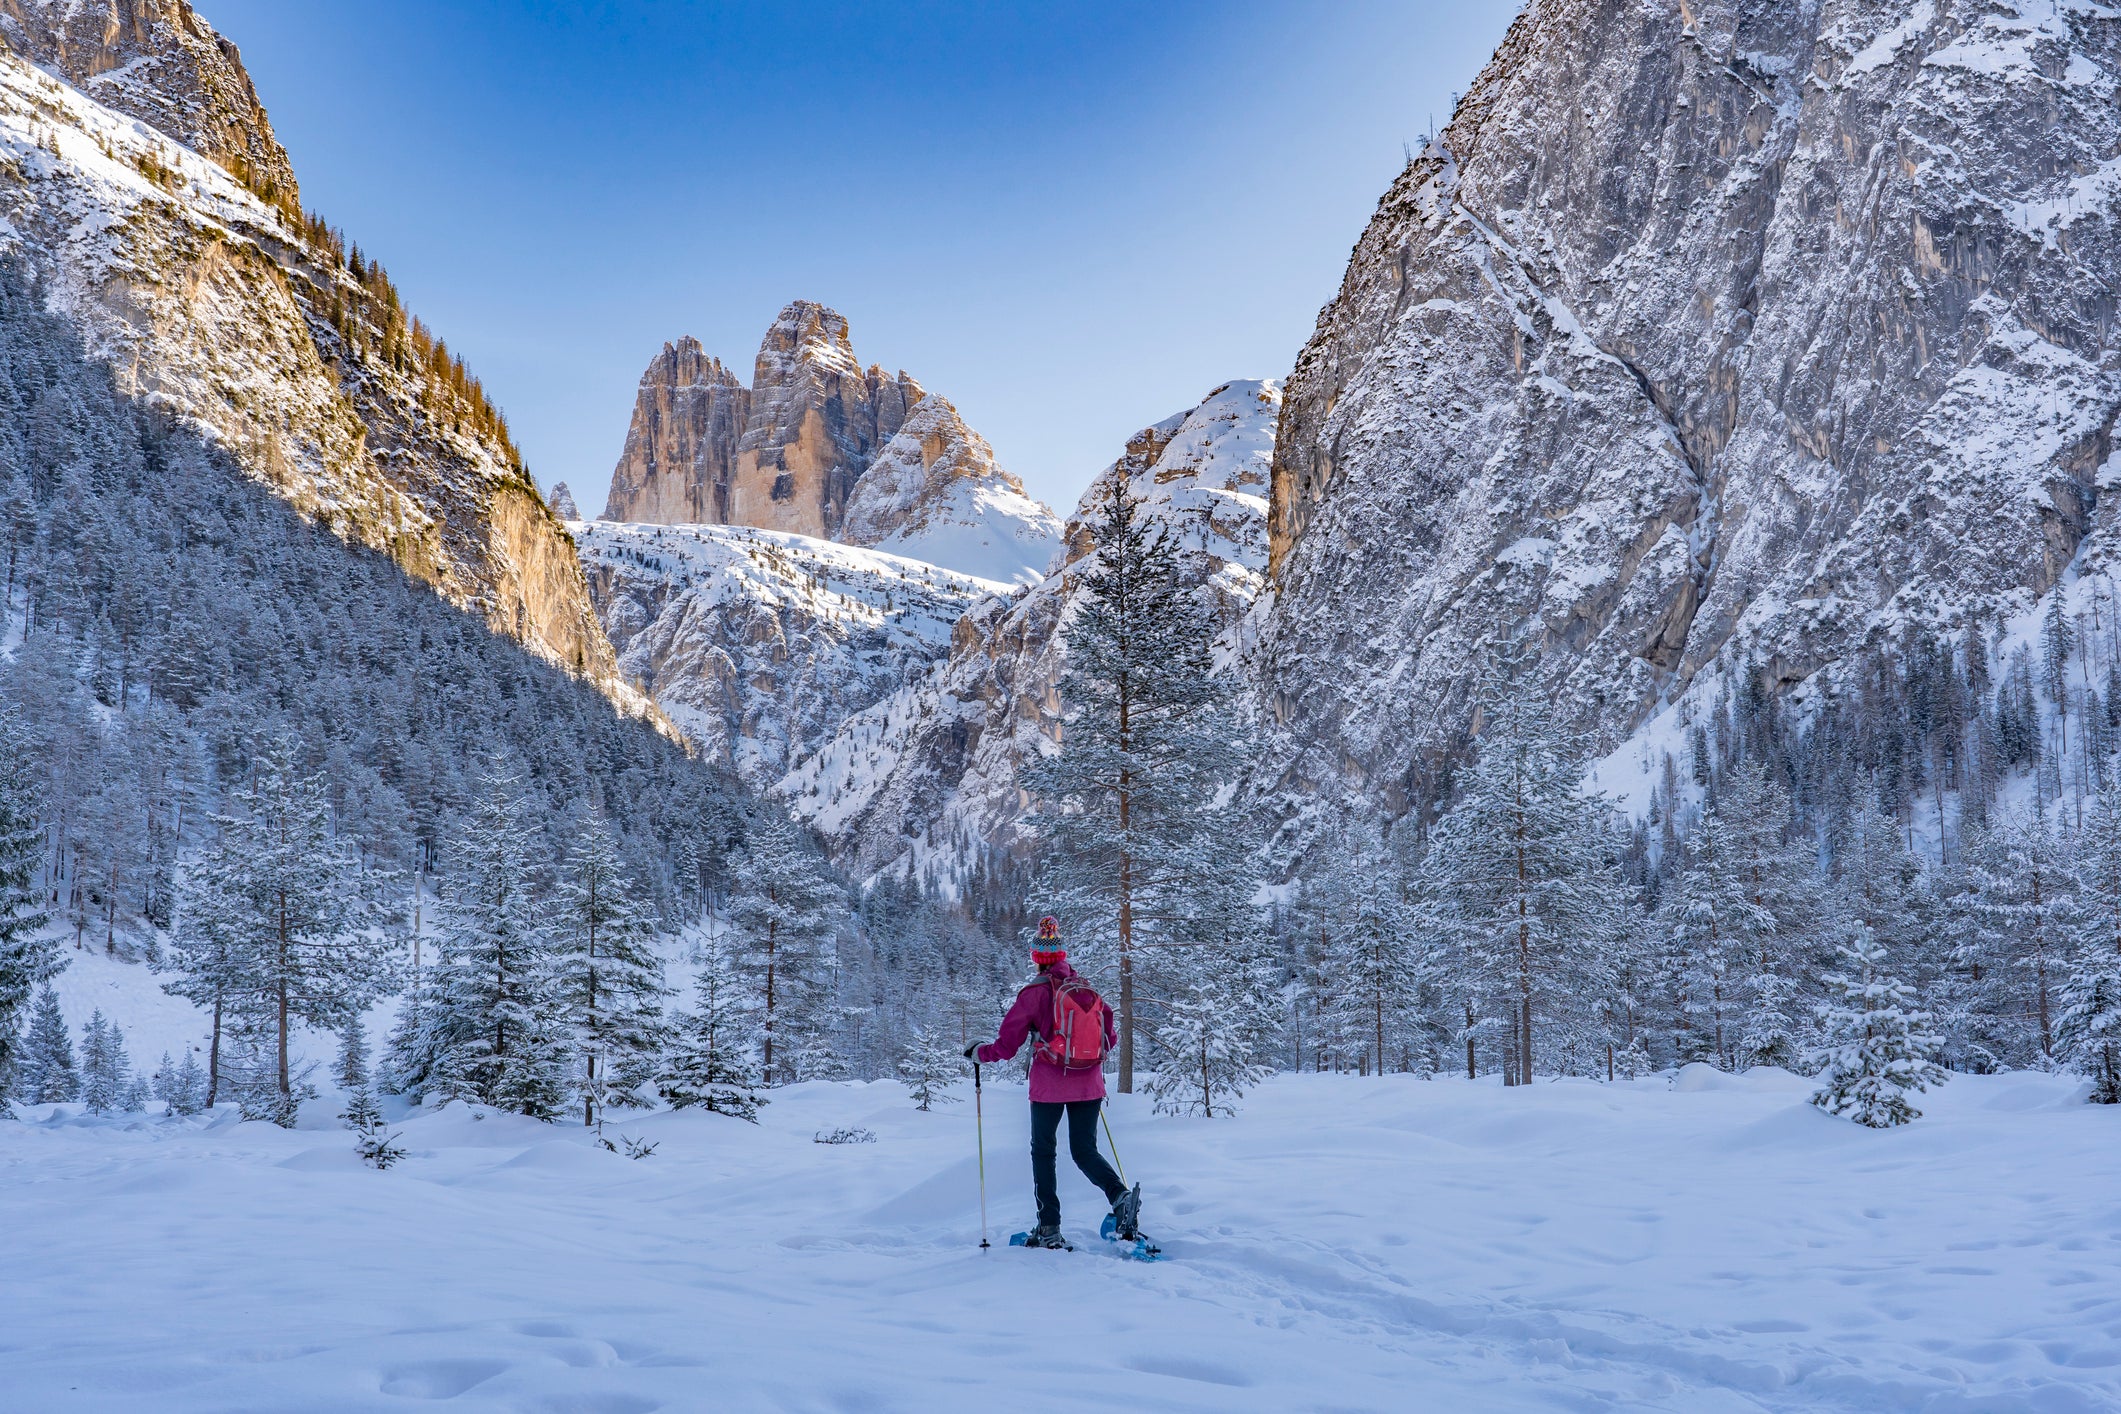 Go off-piste on a snowshoeing adventure in Italy’s dramatic Dolomites